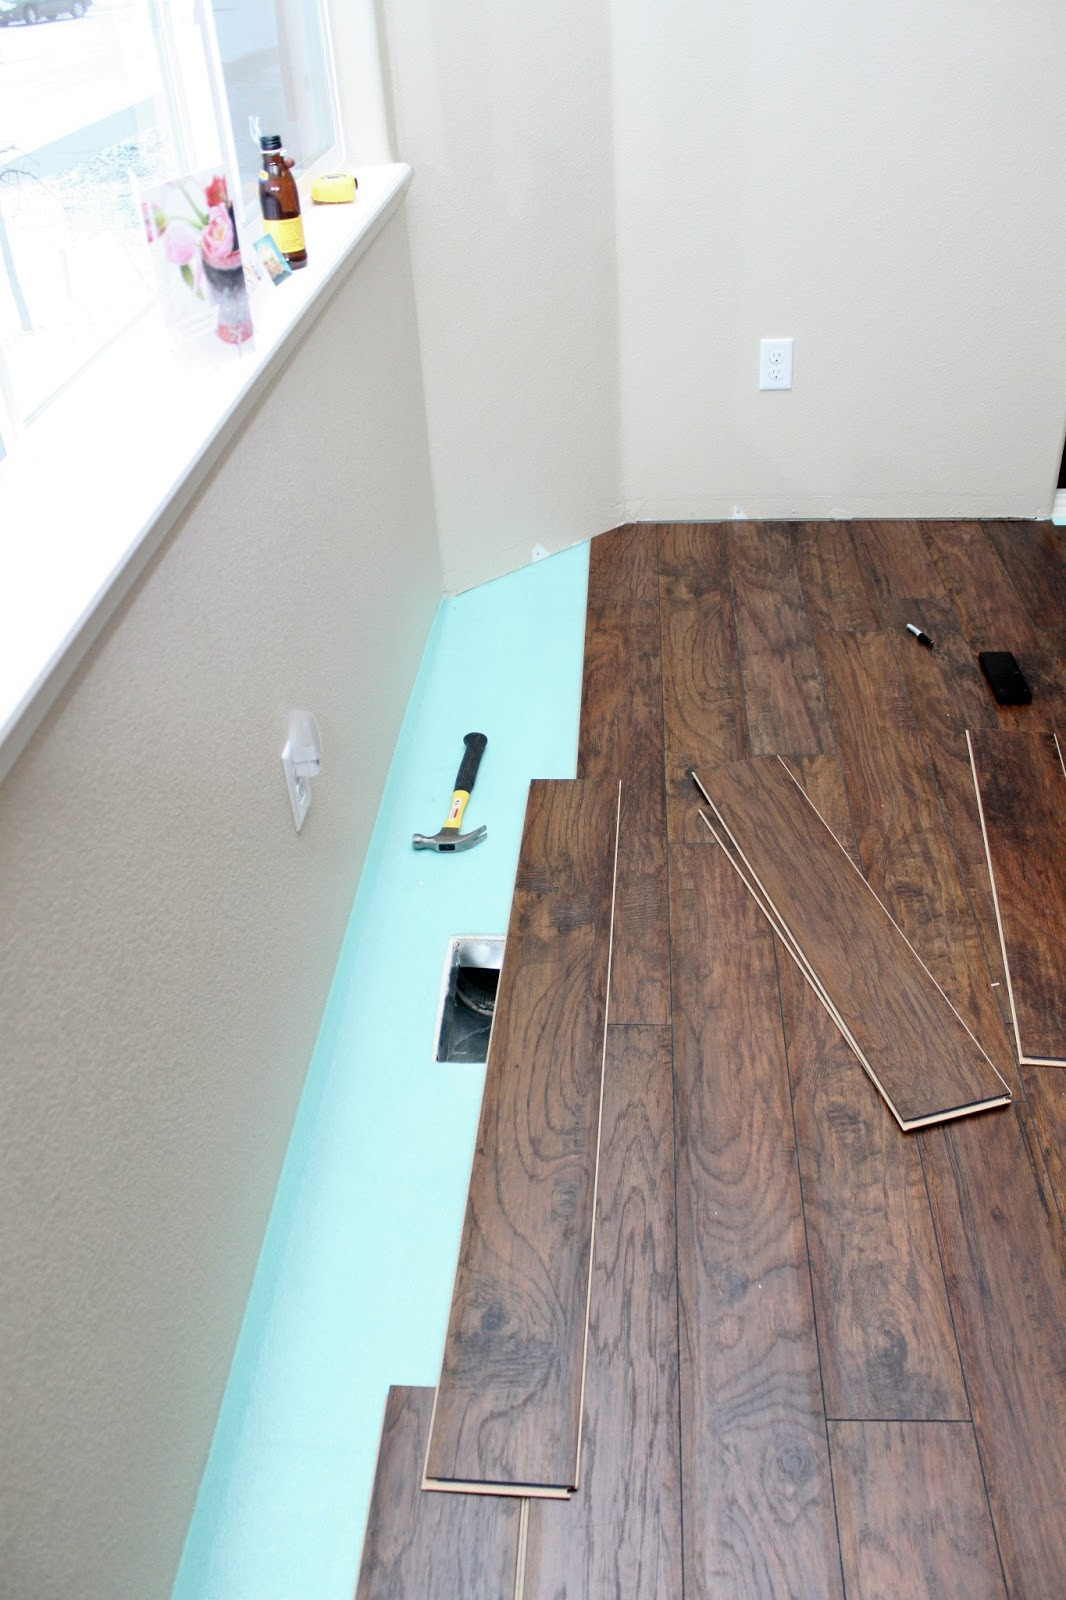 DIY Laminated Wooden Flooring
 Our Modern Homestead DIY Laminate wood flooring project